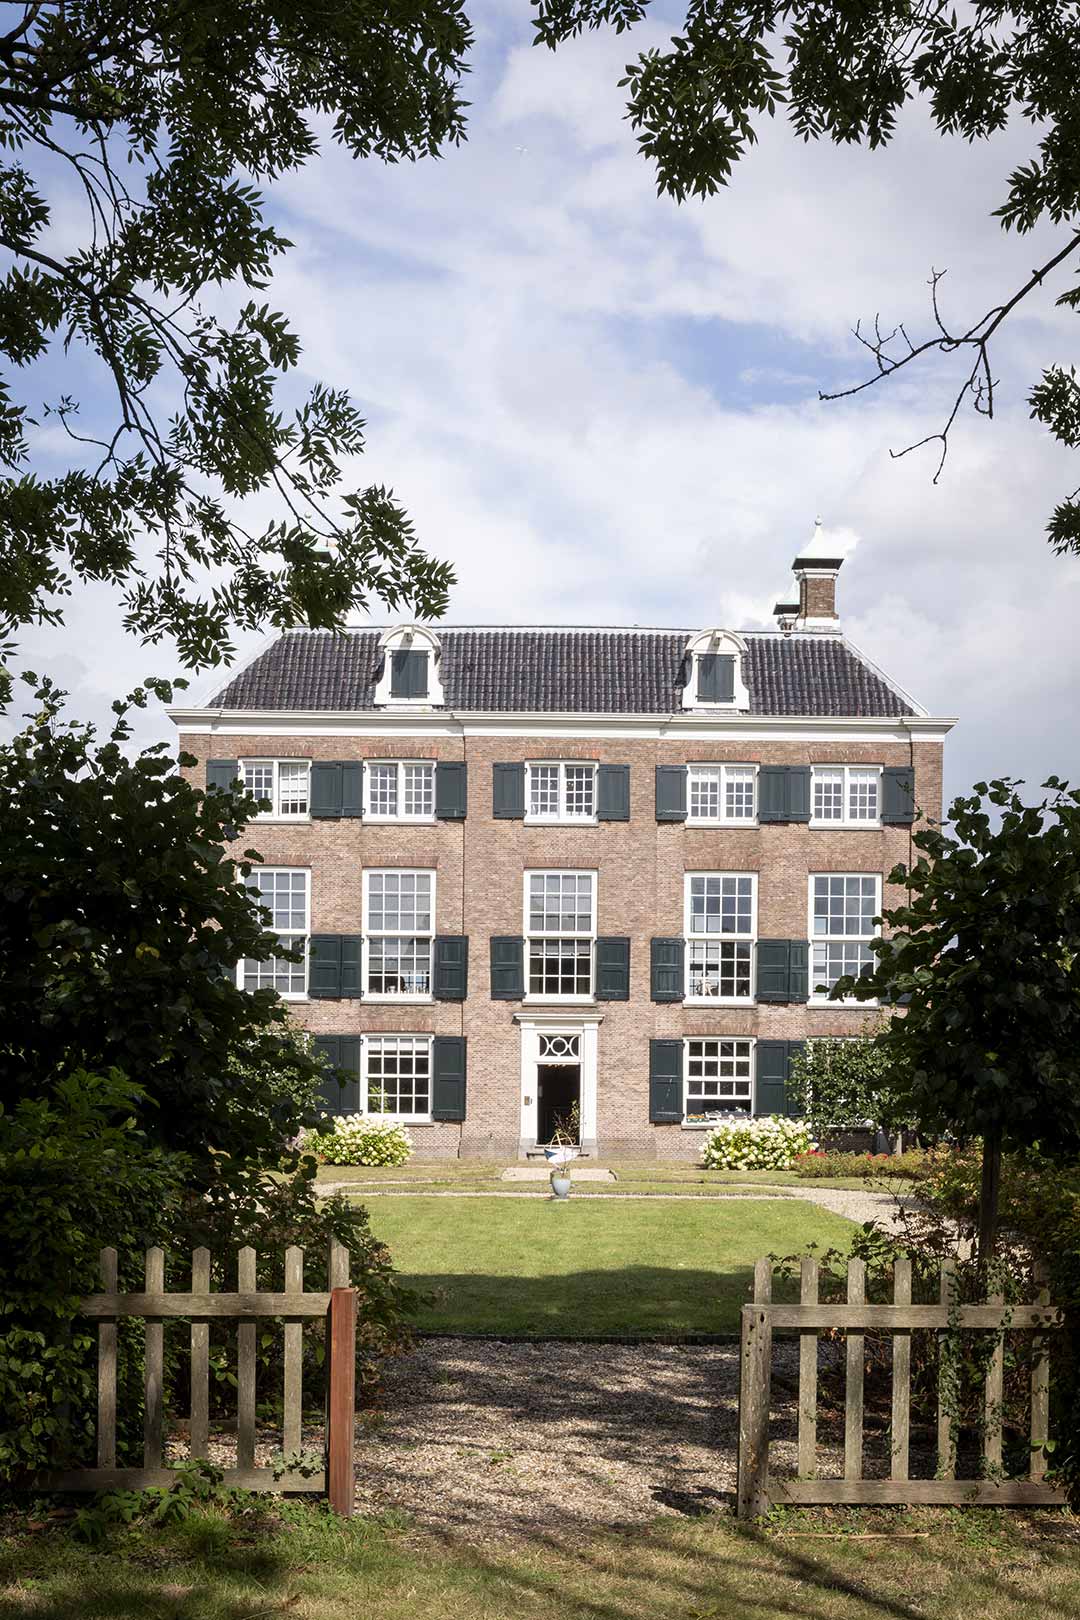 Gemeenlandshuis, a 17th century historical landmark in Amsterdam,was the venue for the event